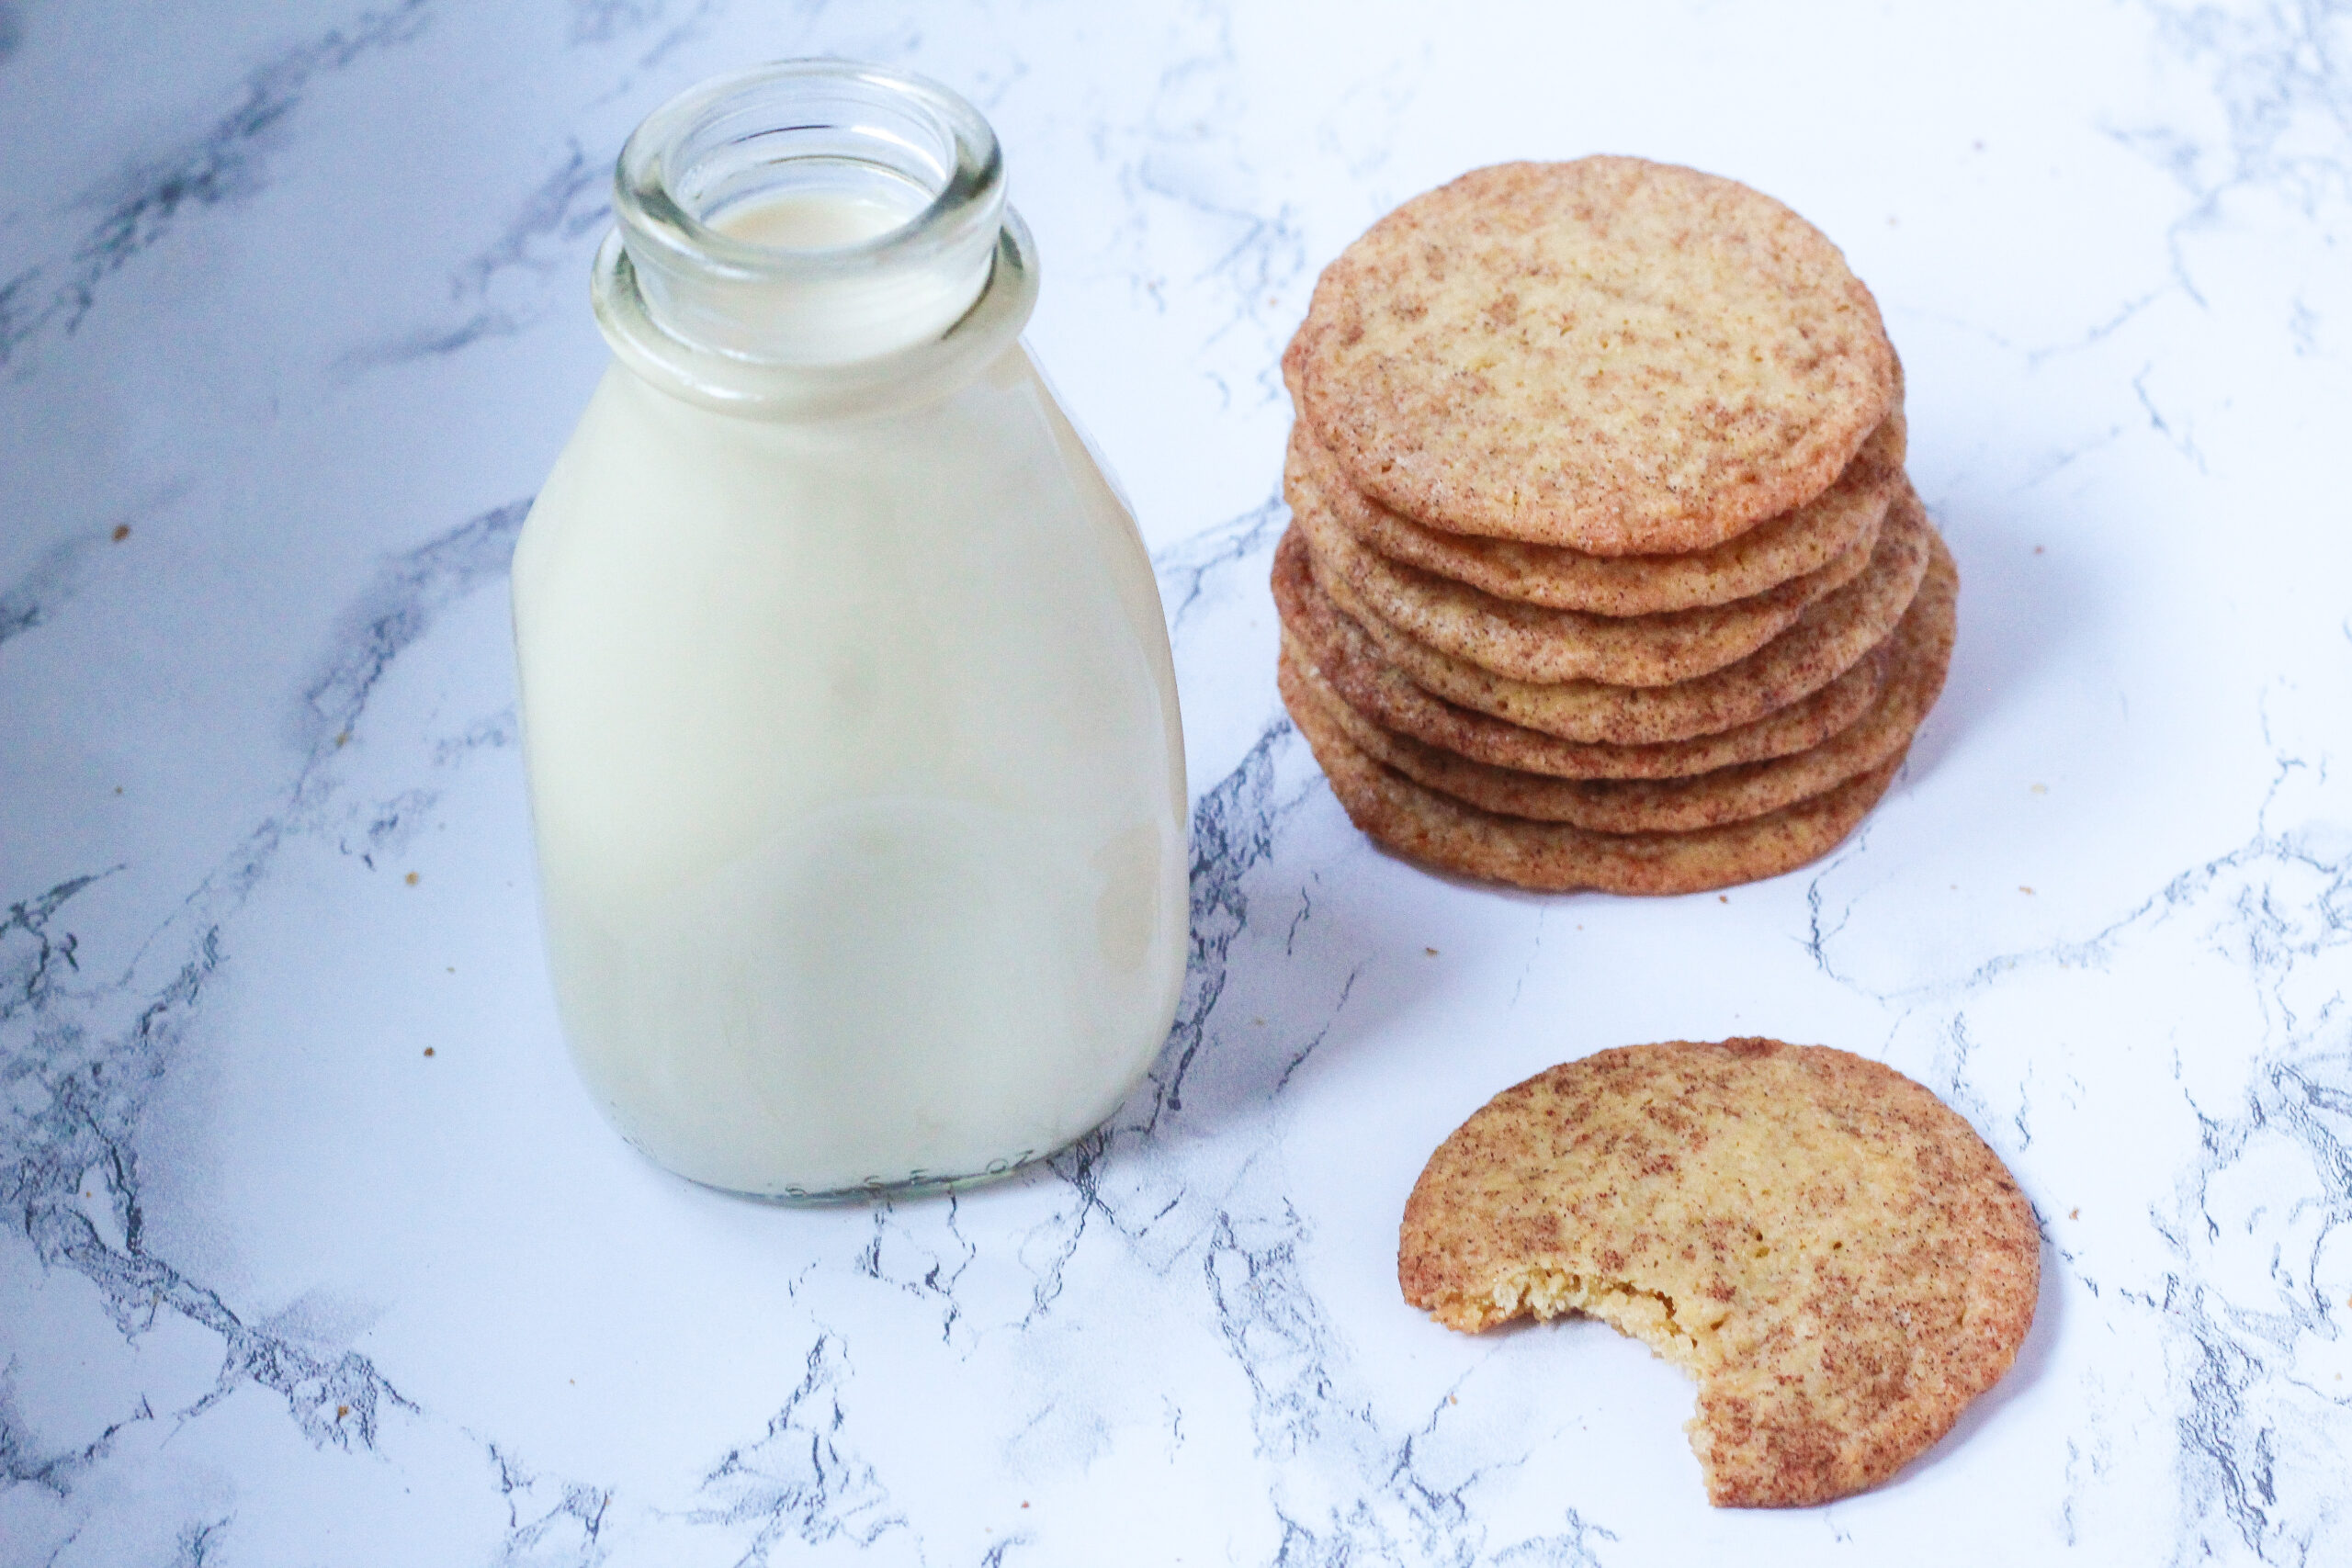 Stack of french toast cookies to the right of a glass milk jar, with a cookie with a bite out of it in front of the cookie stack, all on a marbled surface